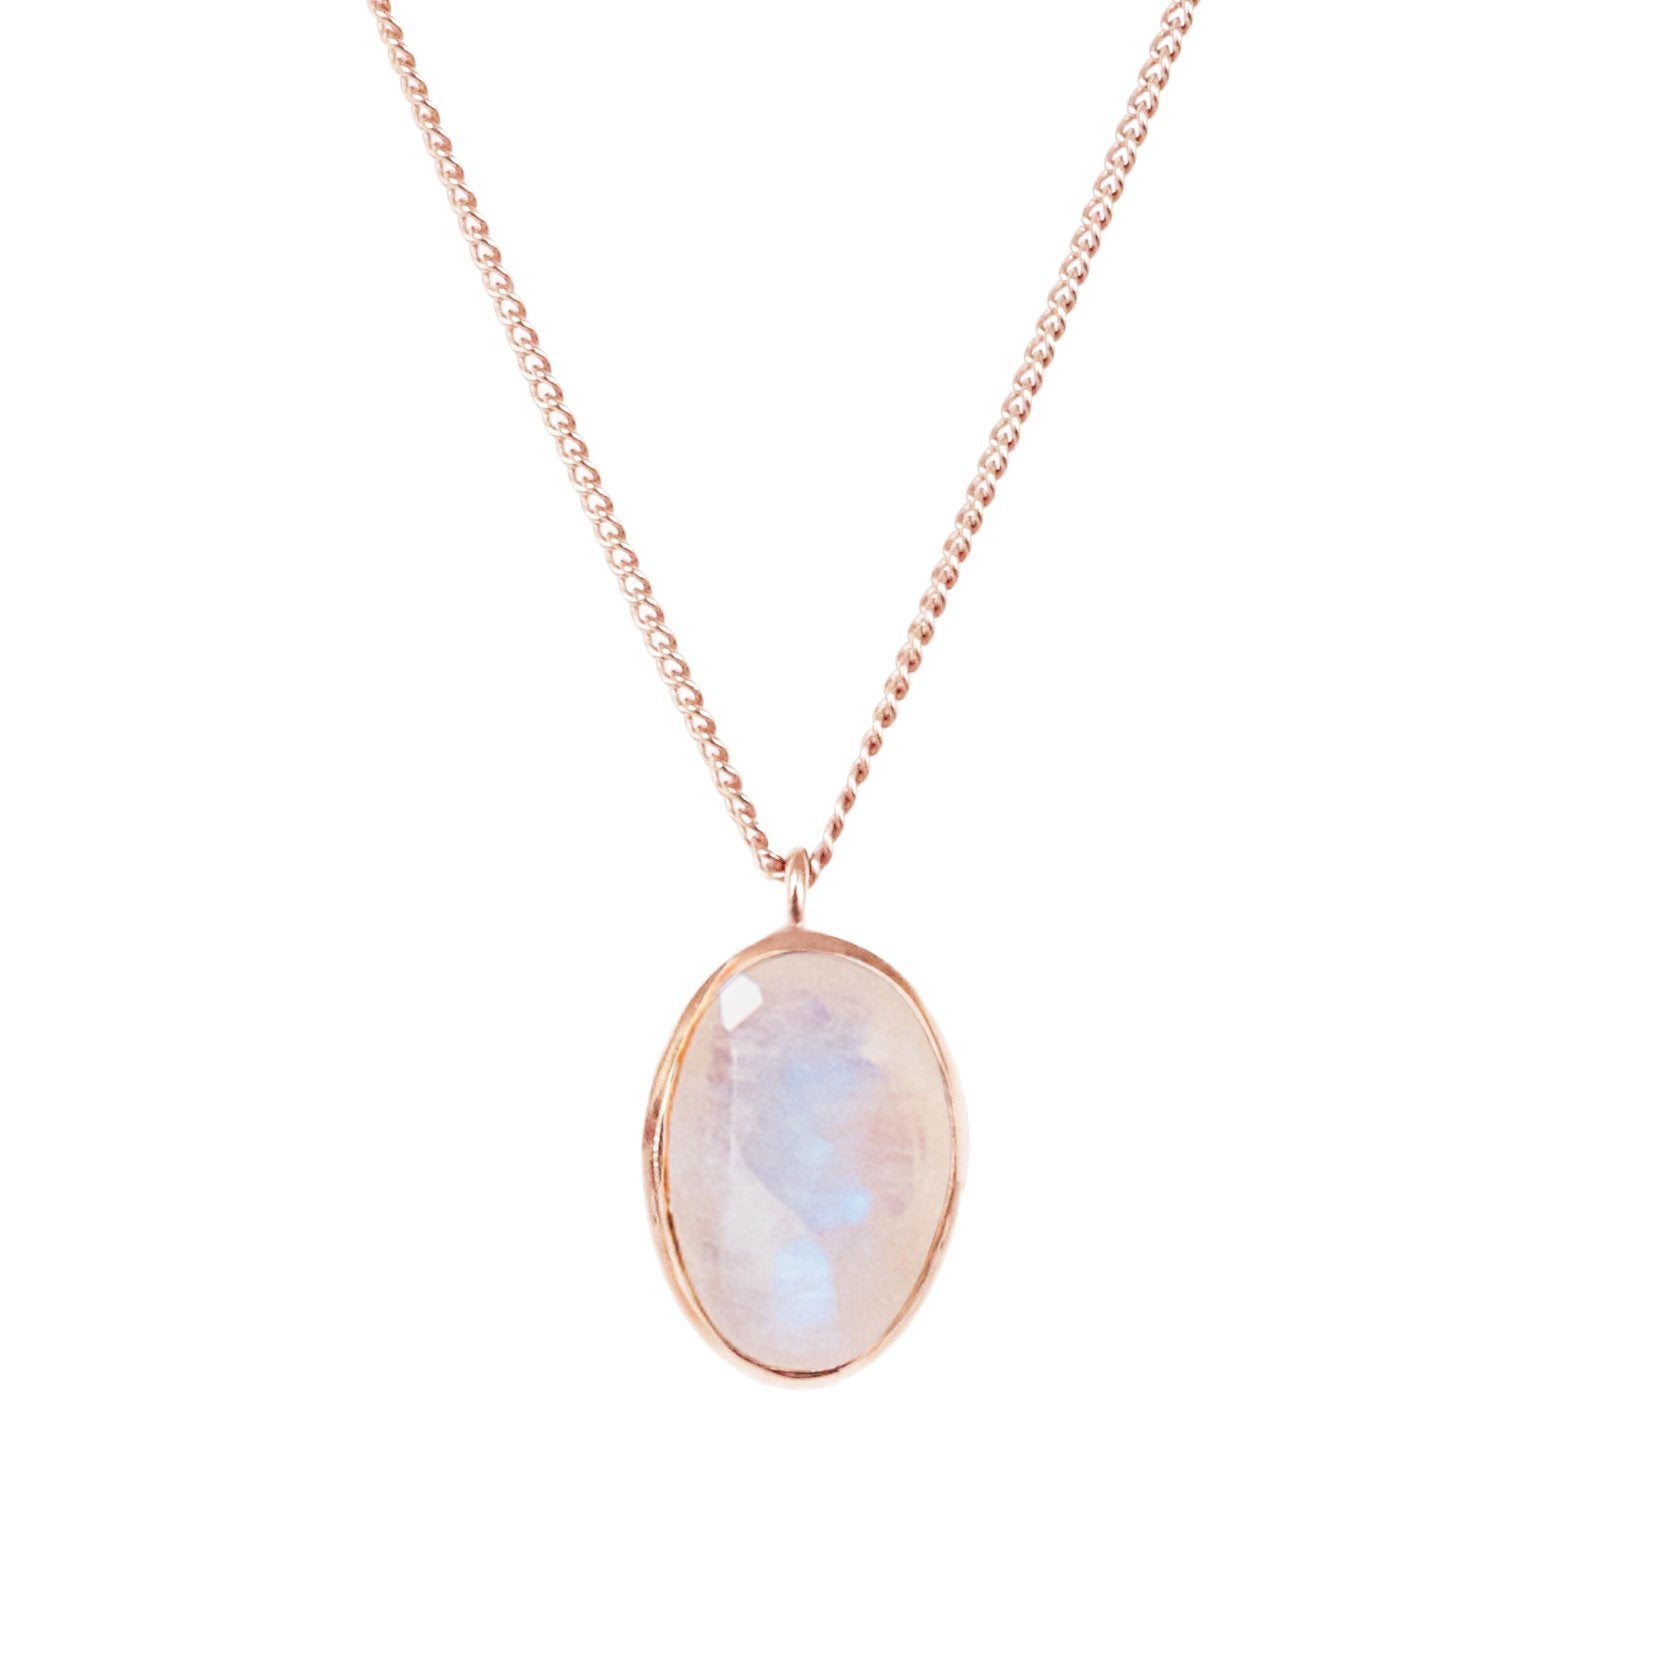 PROTECT PENDANT NECKLACE - RAINBOW MOONSTONE & ROSE GOLD - SO PRETTY CARA COTTER